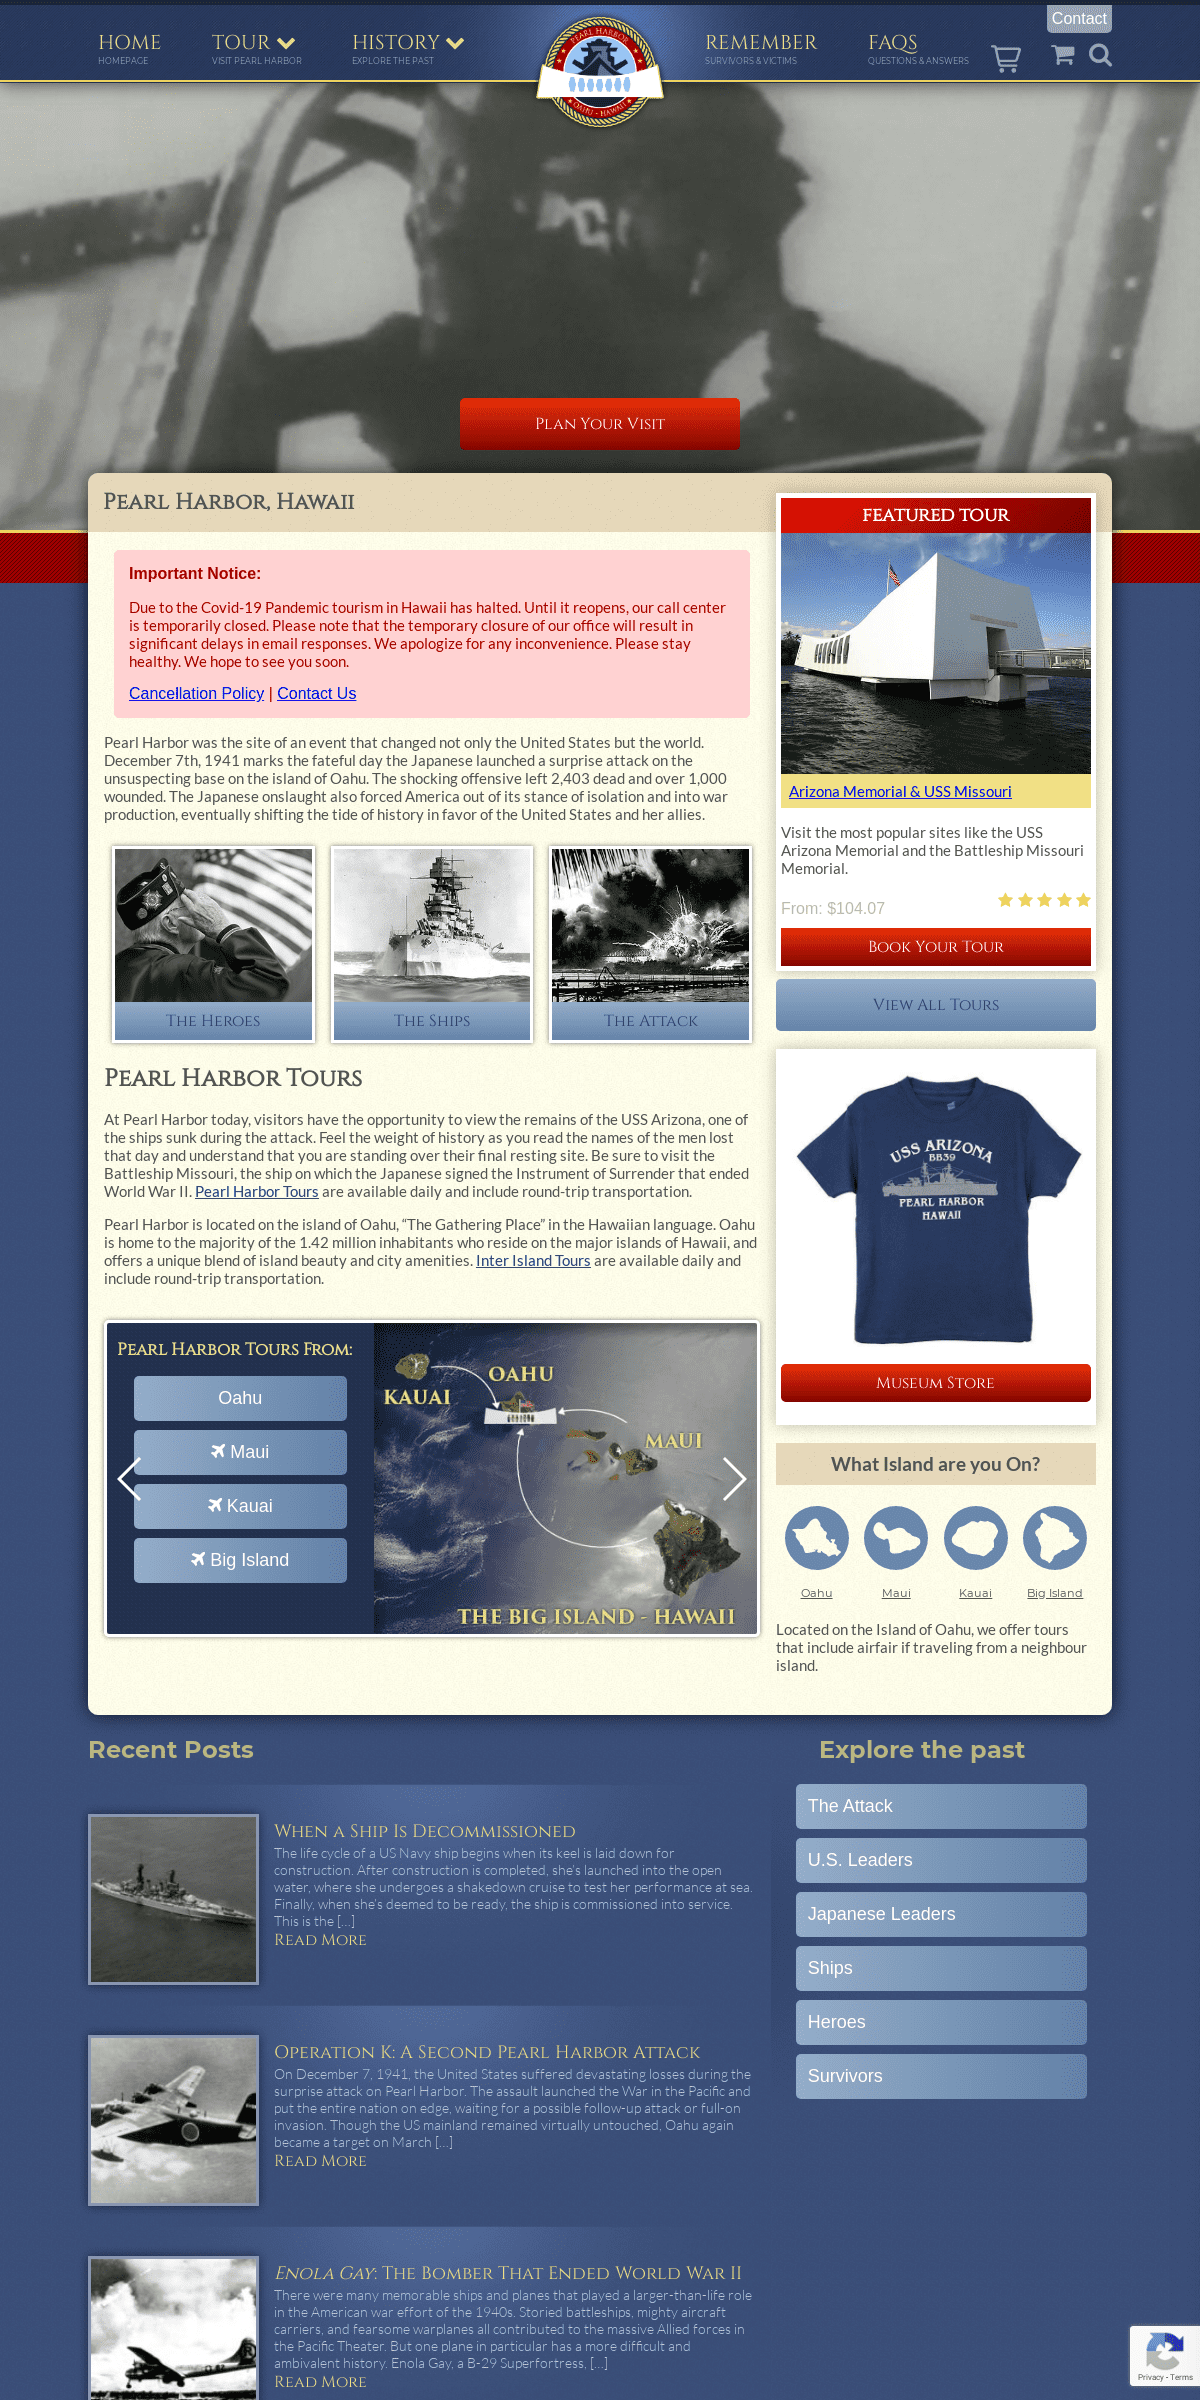 A complete backup of pearlharbor.org